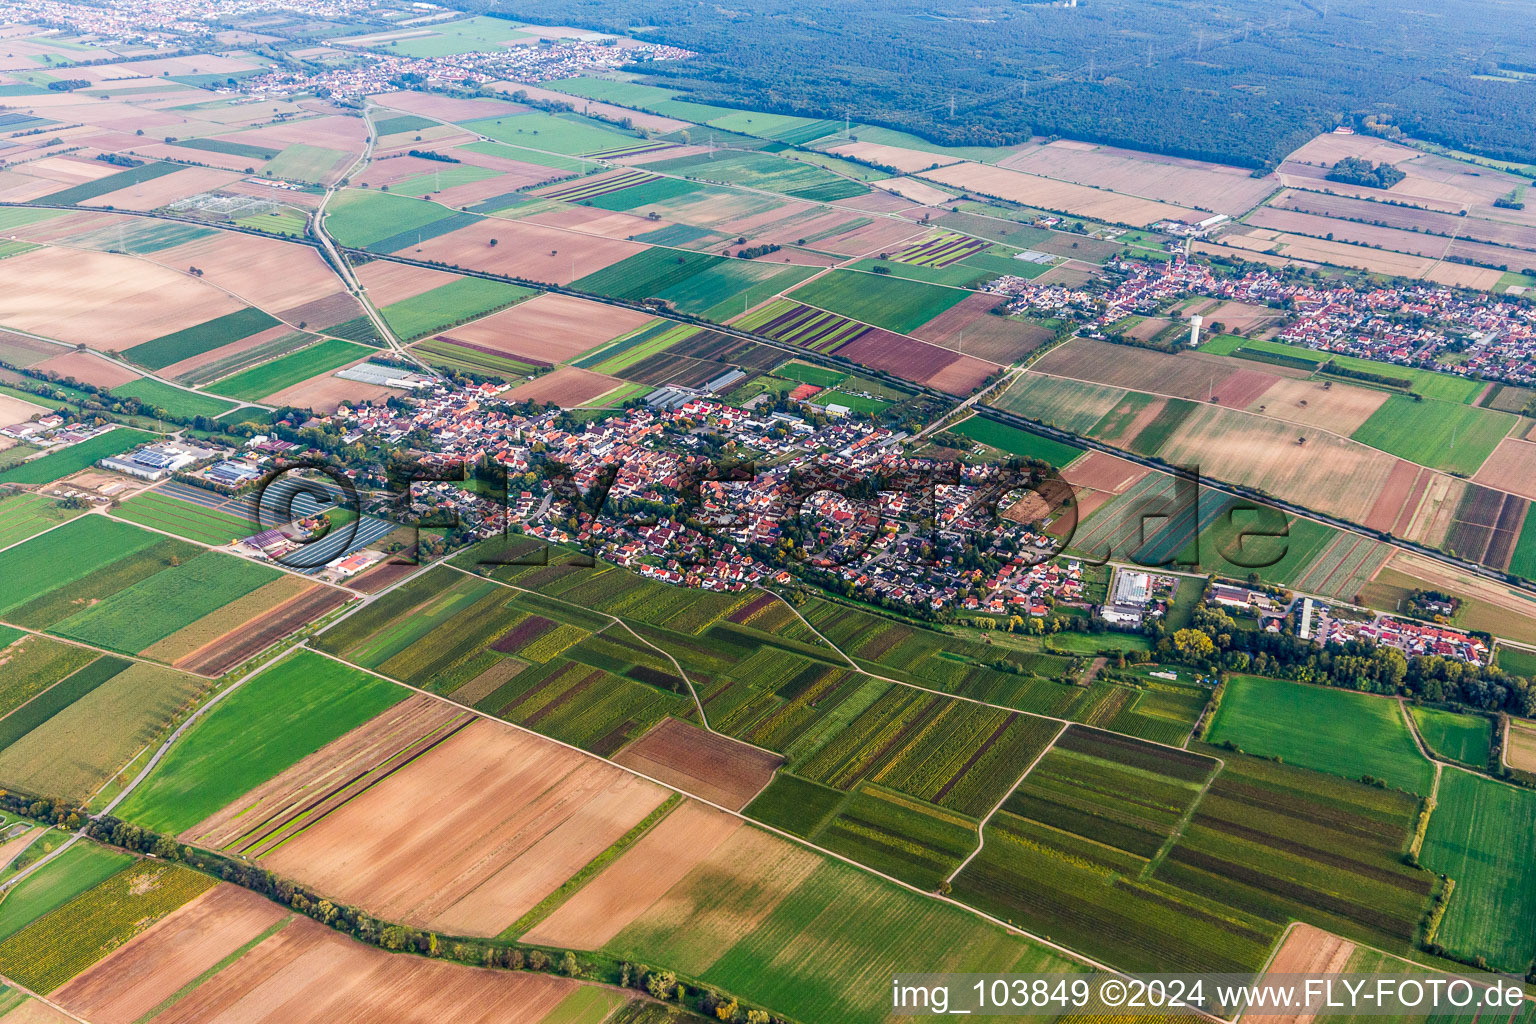 Aerial photograpy of Village - view on the edge of agricultural fields and farmland in Weingarten (Pfalz) in the state Rhineland-Palatinate, Germany